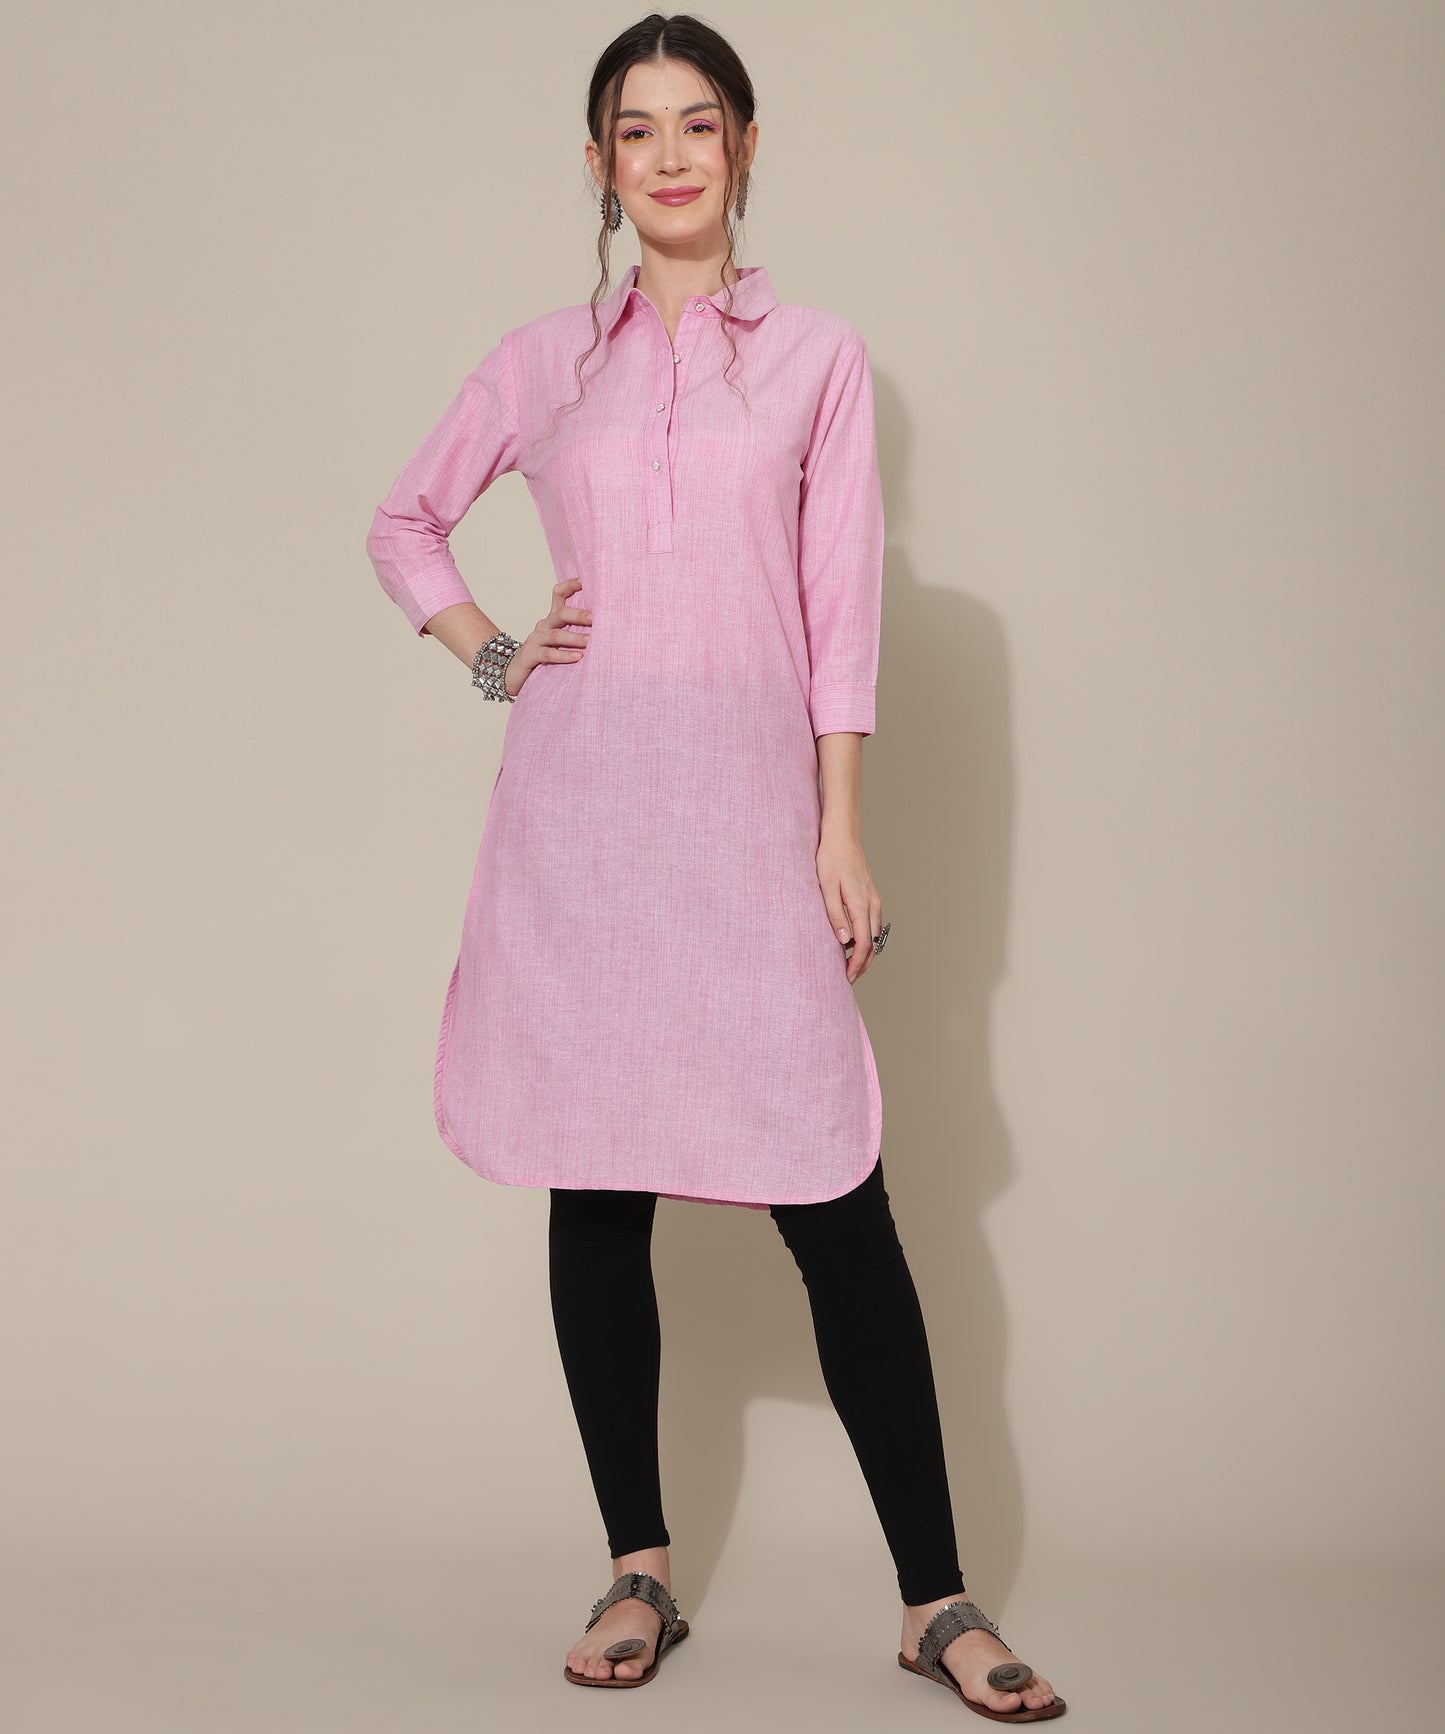 Cotton Kurta For Women Collar Design Pattern with Button Style, Pink